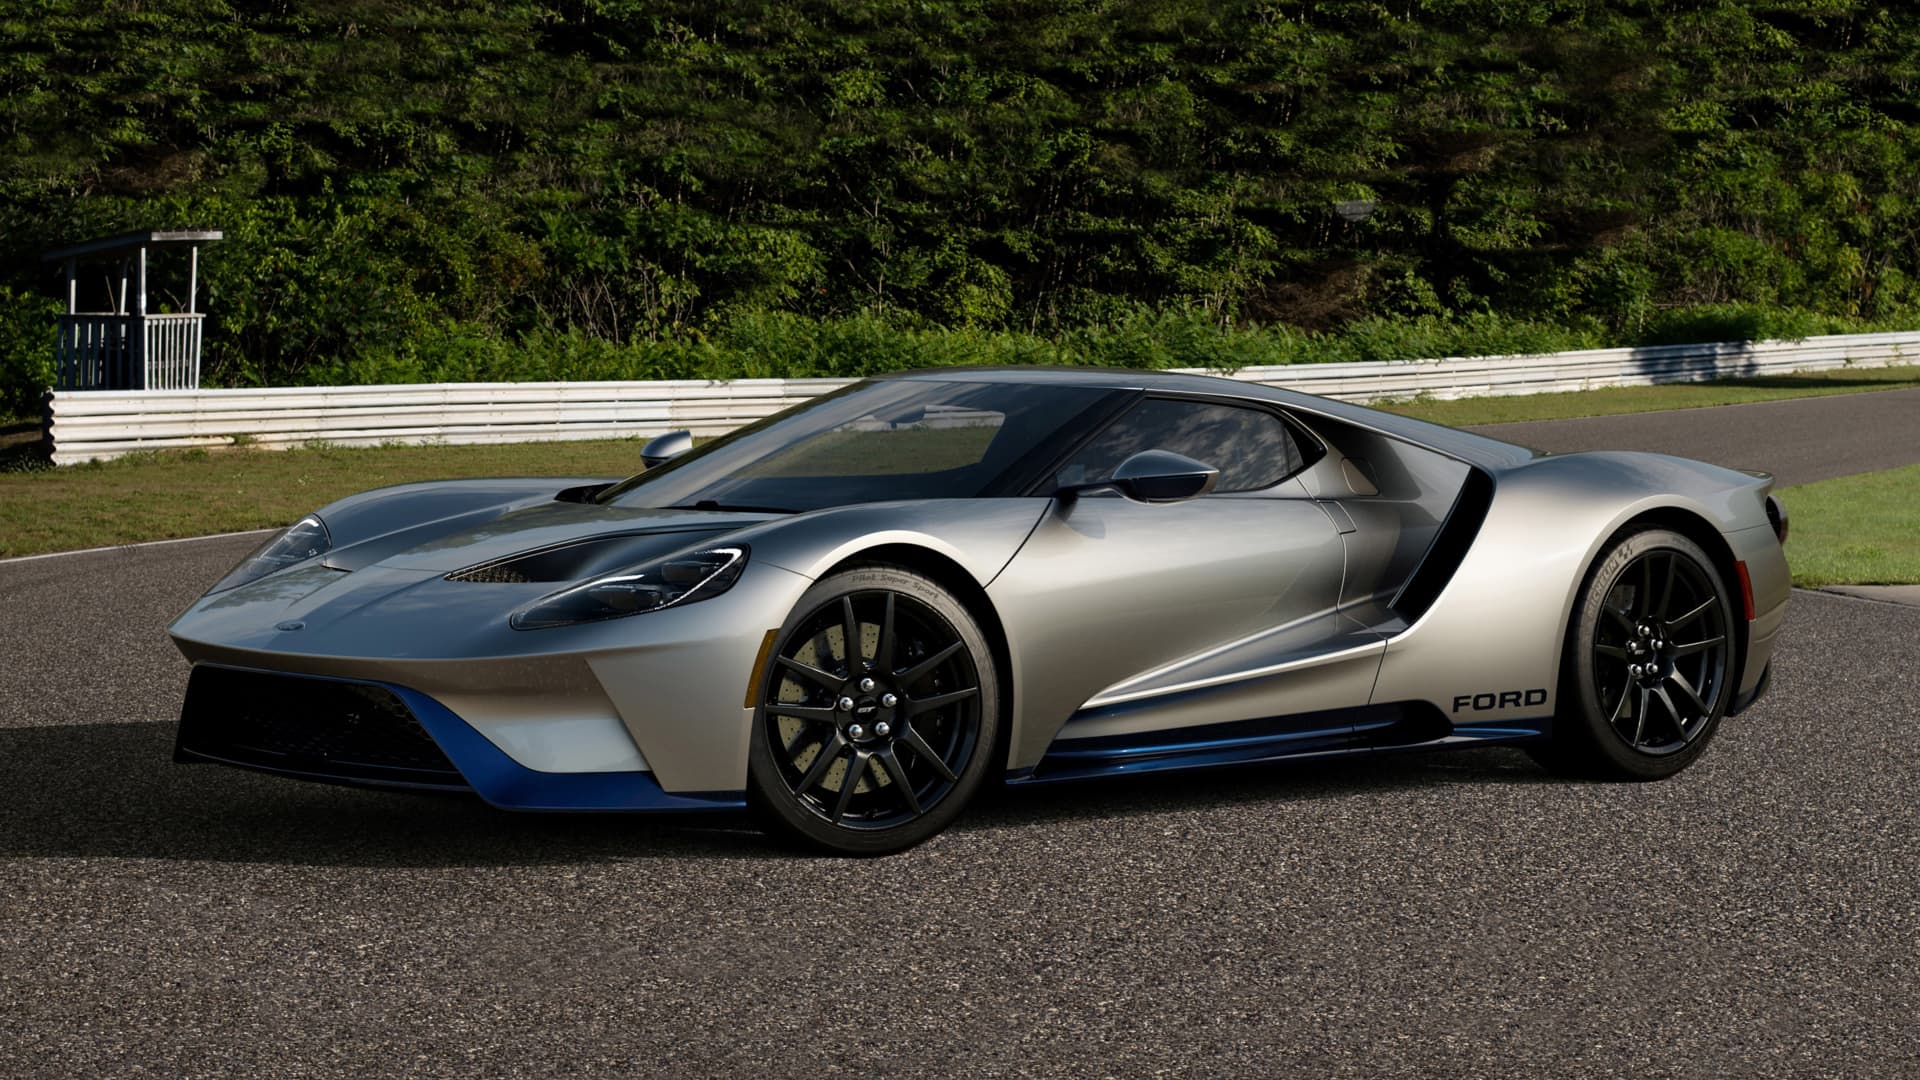 Ford to end production of $500,000 GT supercar with special edition Auto Recent